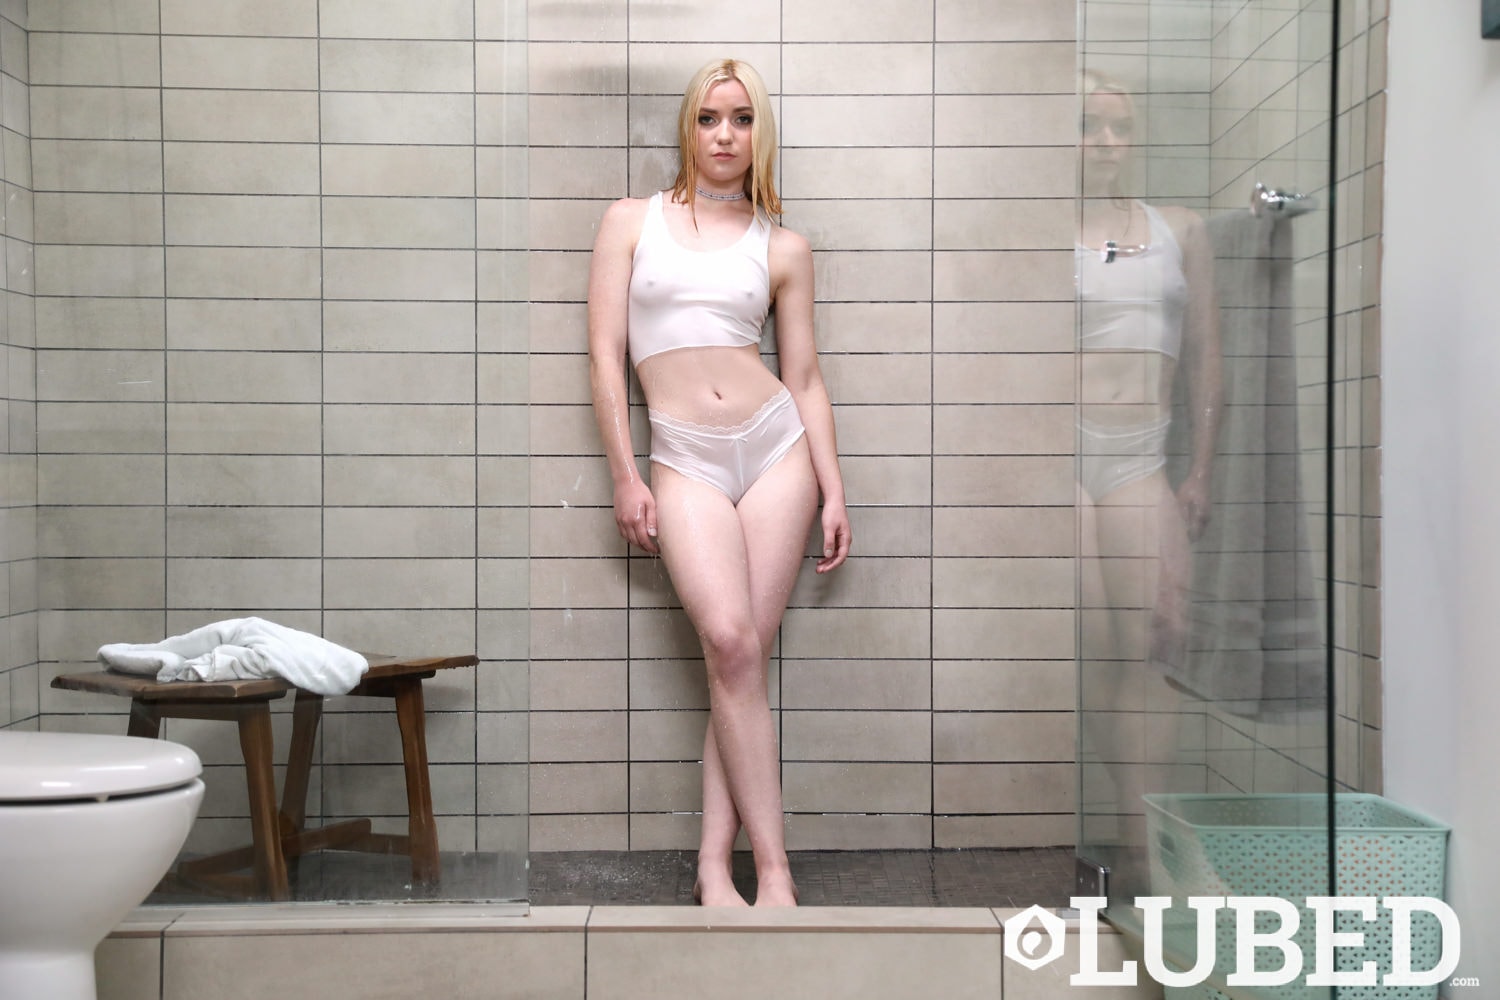 Lubed 'Dripping In The Shower' starring Maddi Winters (Photo 1)